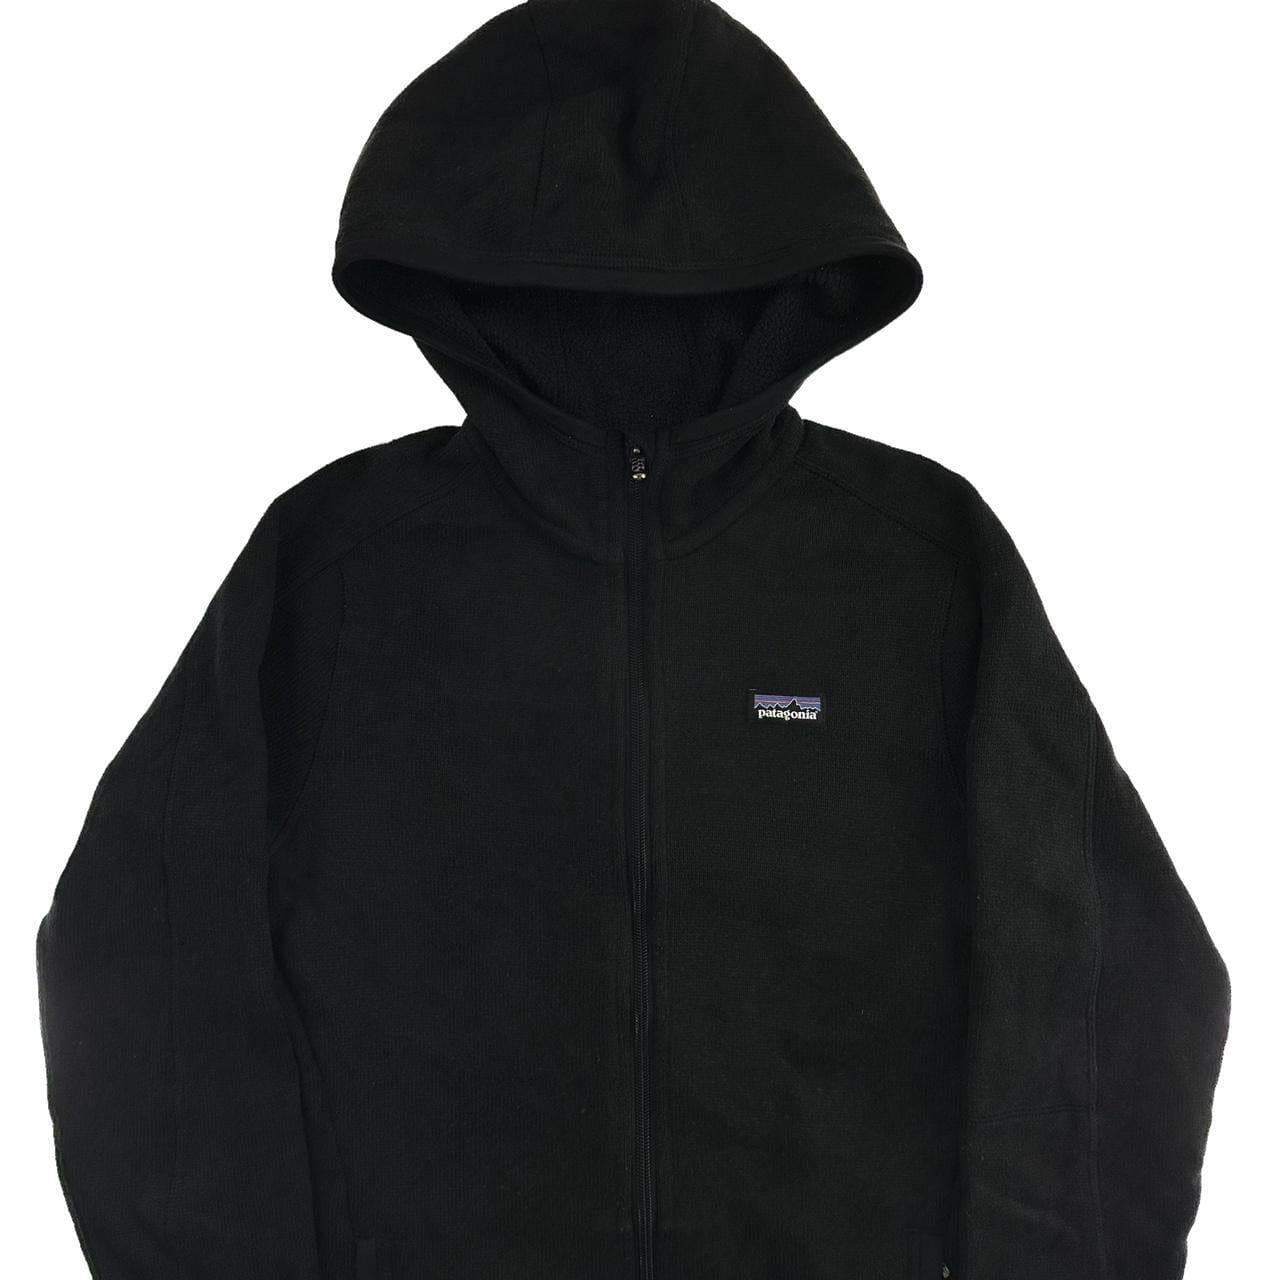 Patagonia zip hoodie woman’s size XS - Known Source